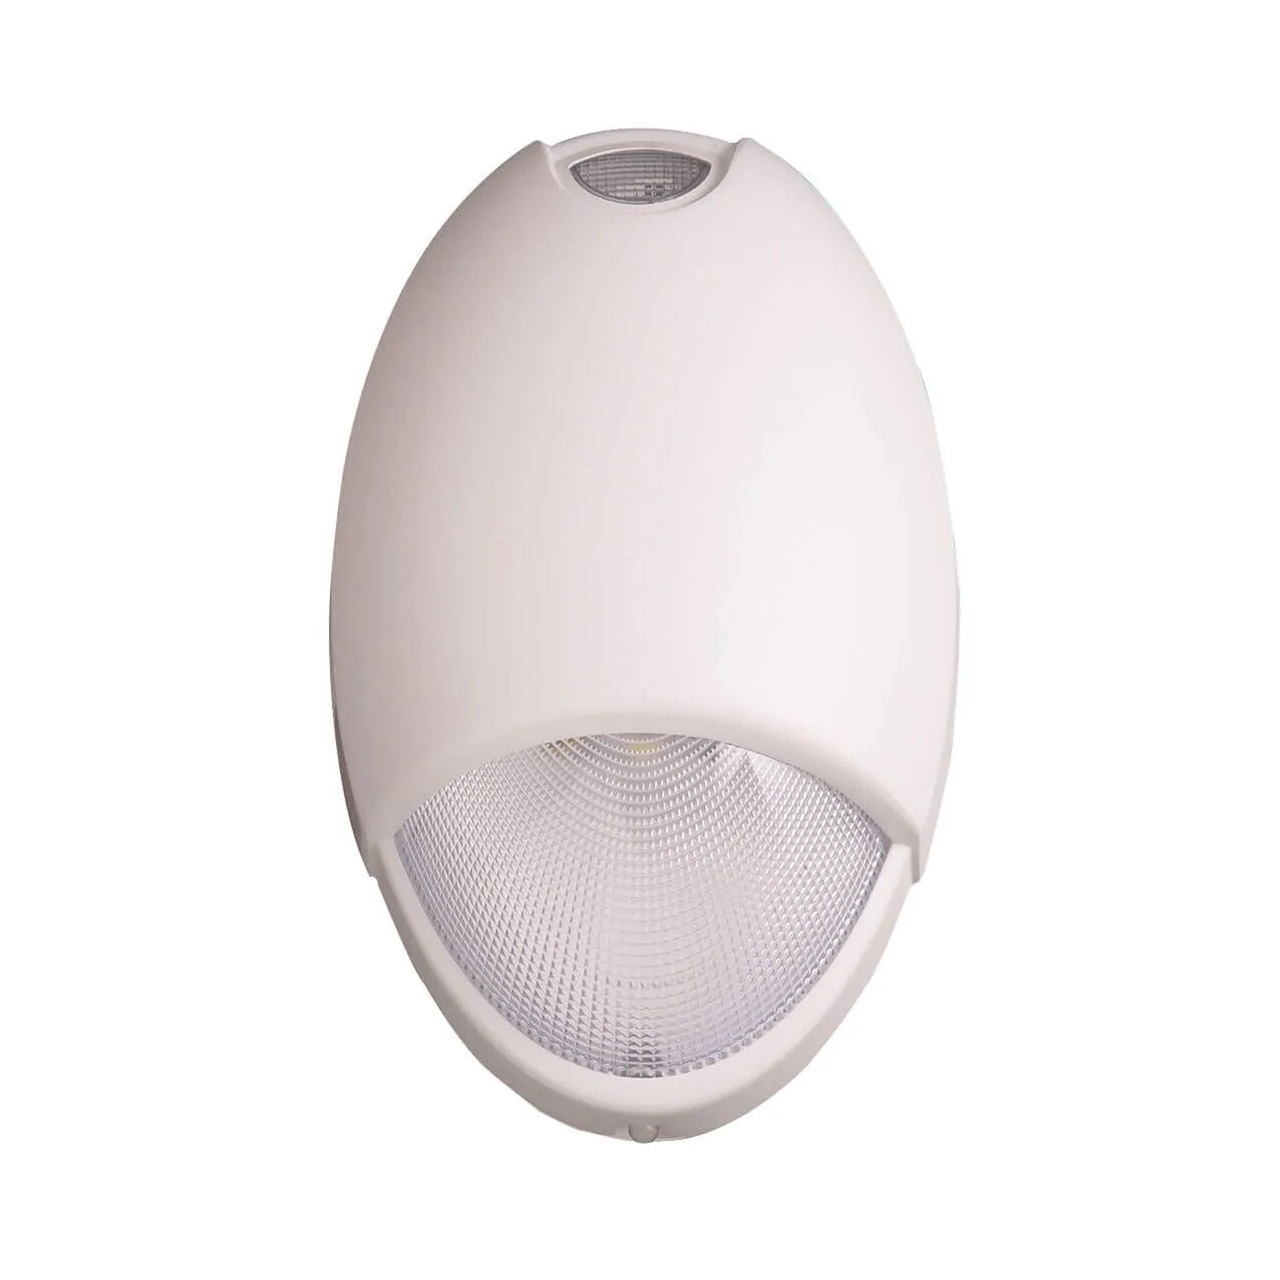 Outdoor Rated High Output White LED Emergency Light (Bug Eyes) with Battery  Backup, Wet Location Lis…See more Outdoor Rated High Output White LED